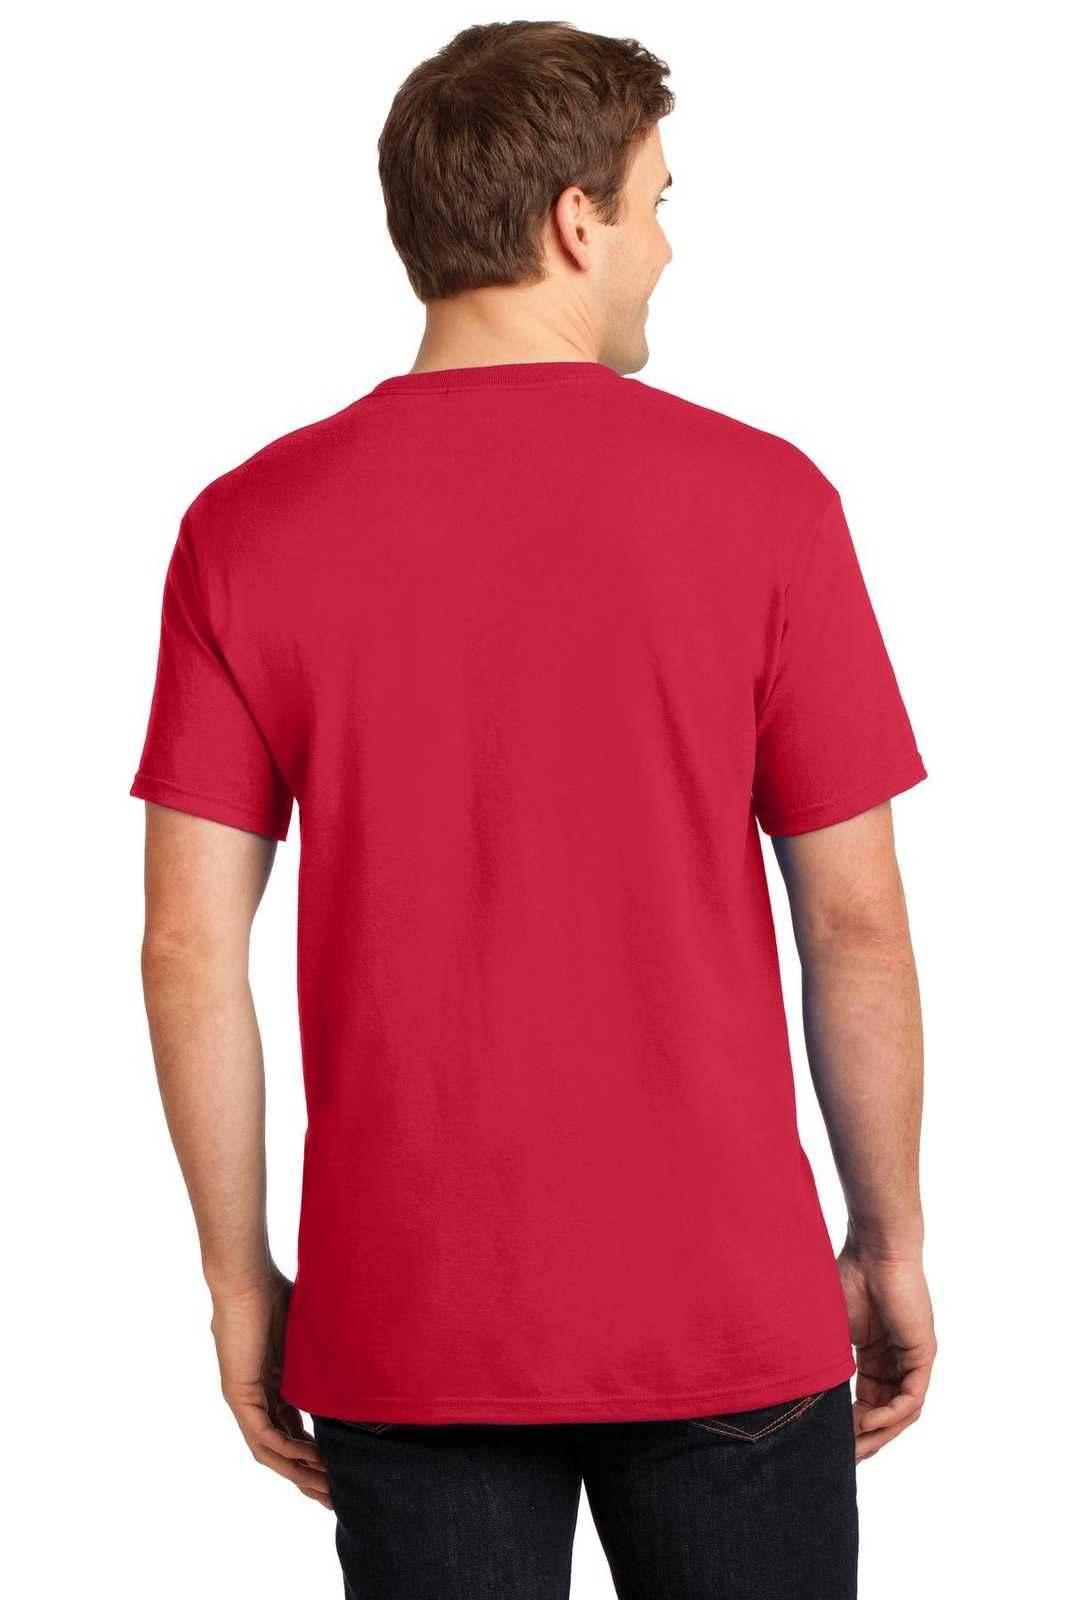 Jerzees 29MP Dri-Power 50/50 Cotton/Poly Pocket T-Shirt - True Red - HIT a Double